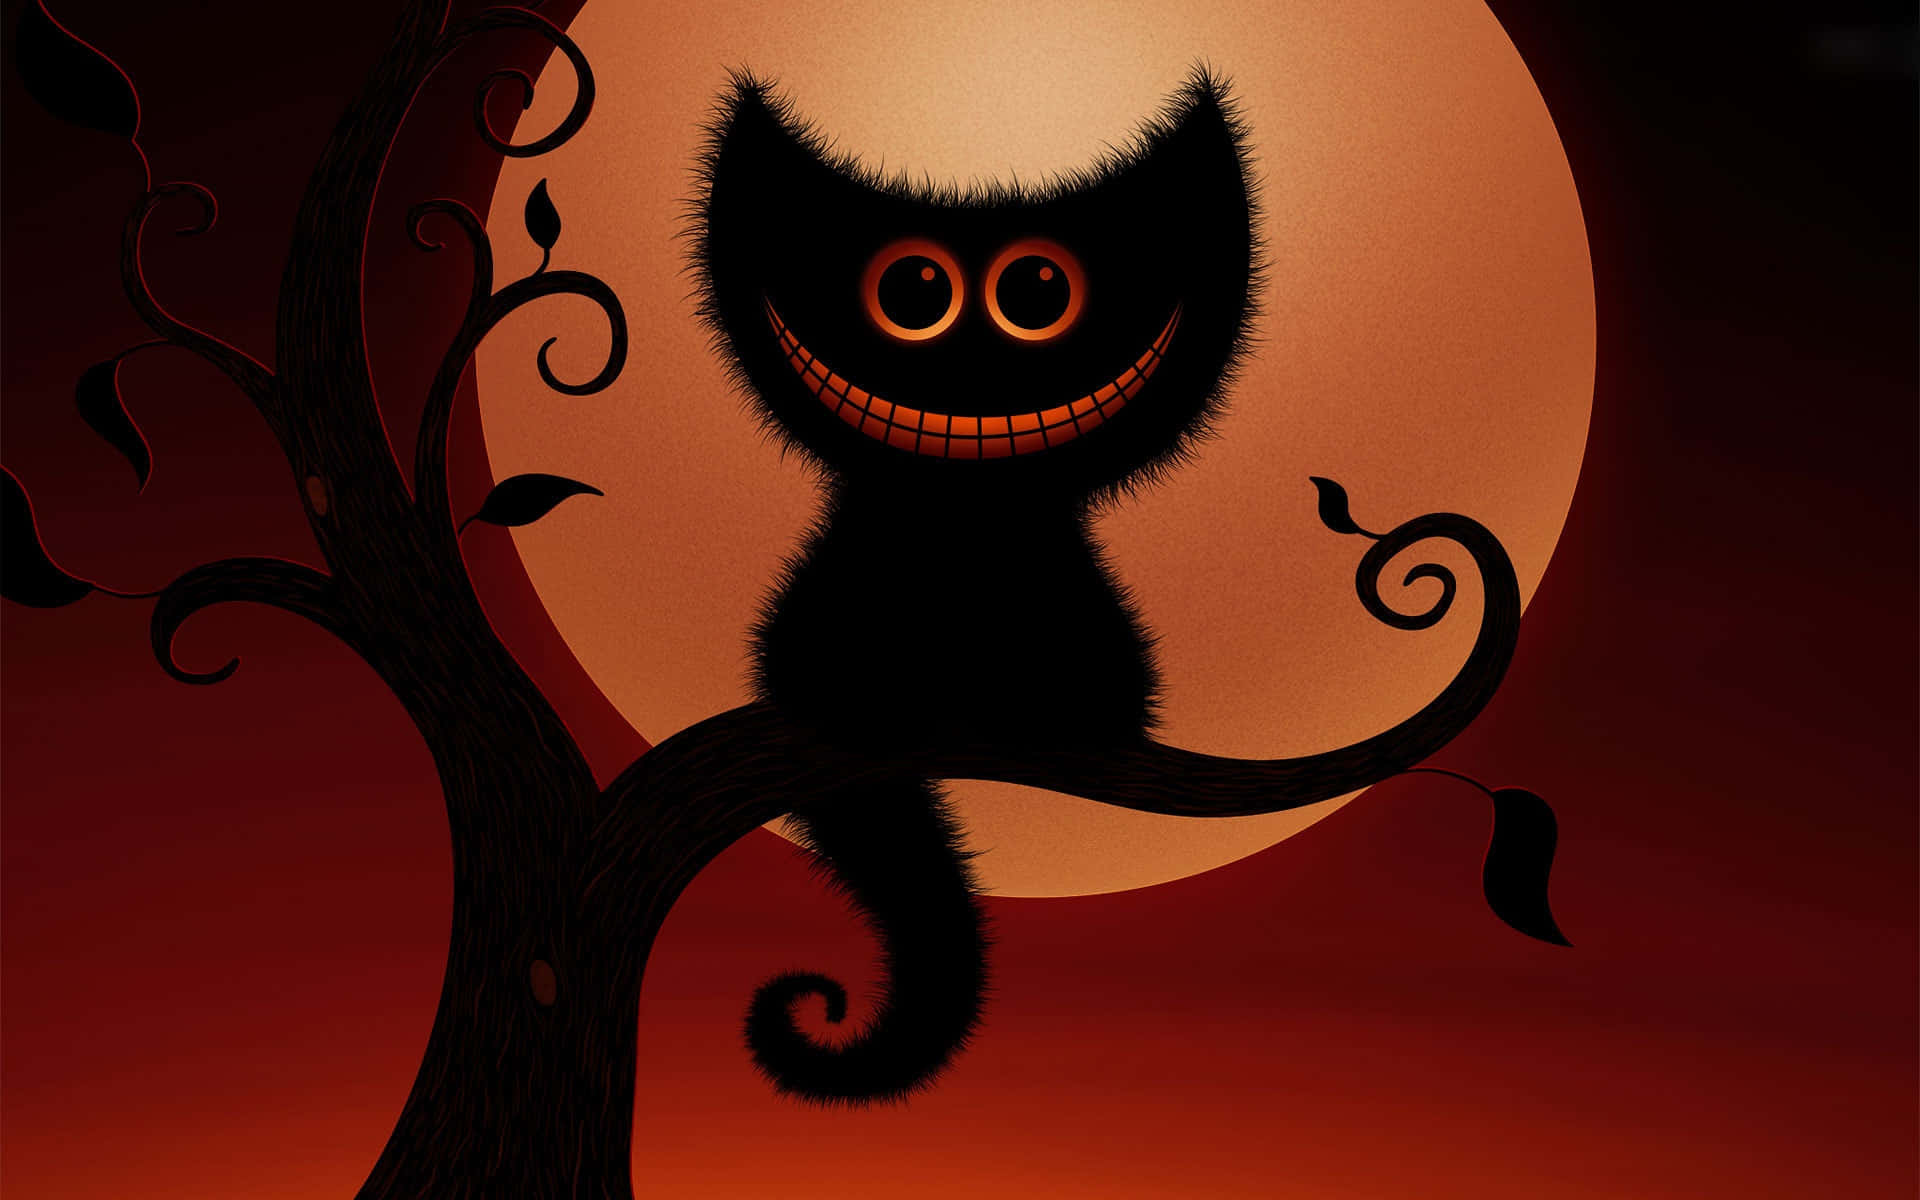 "The Mysterious Cheshire Cat"